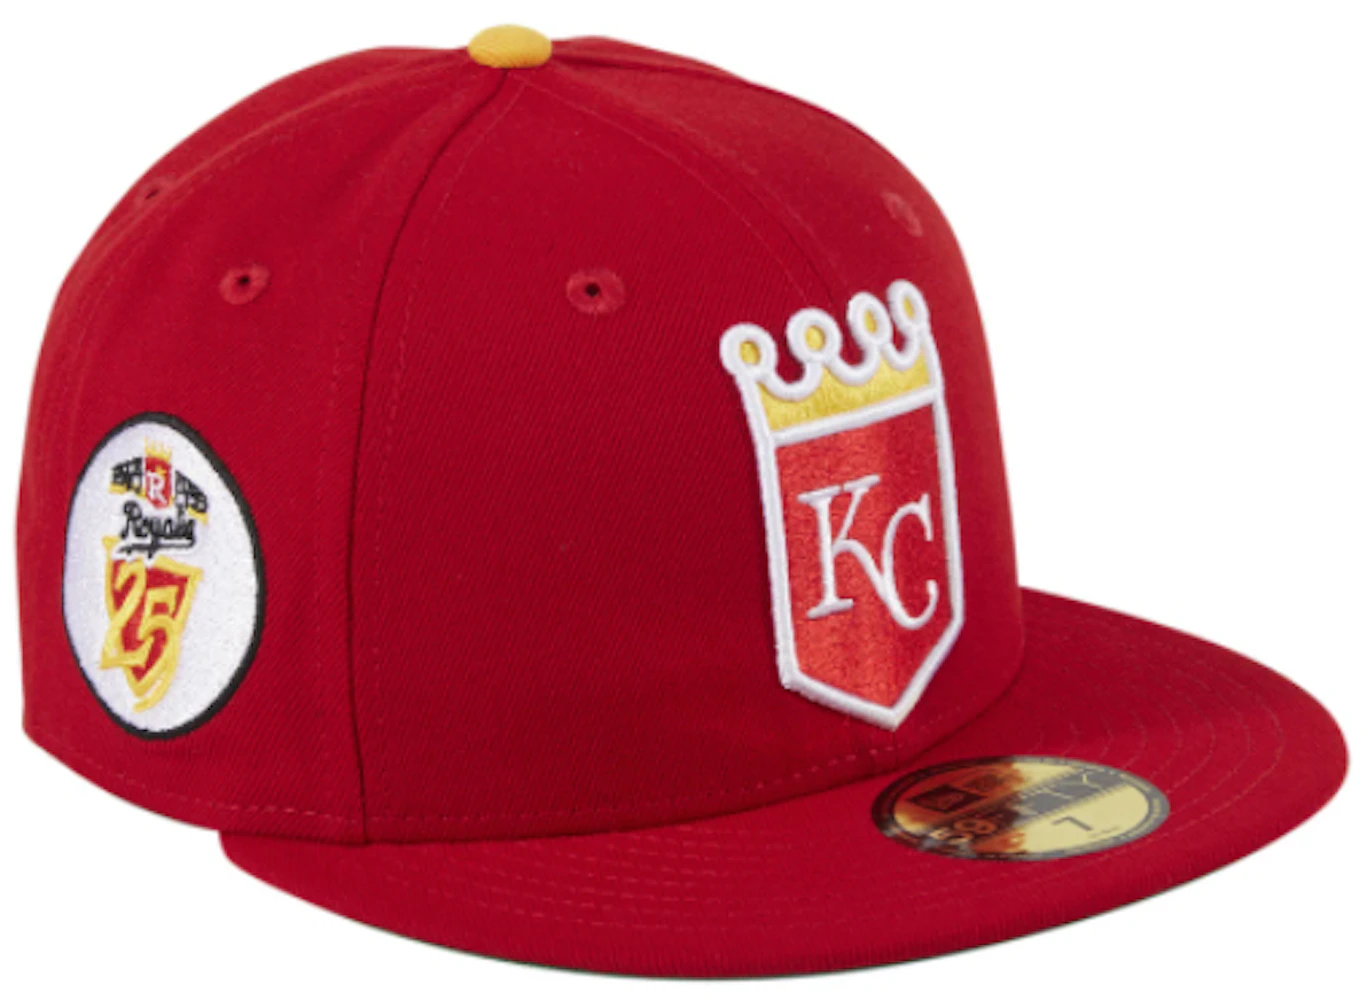 Rally House on X: Today's #Royals 30th Anniv. World Series hat as